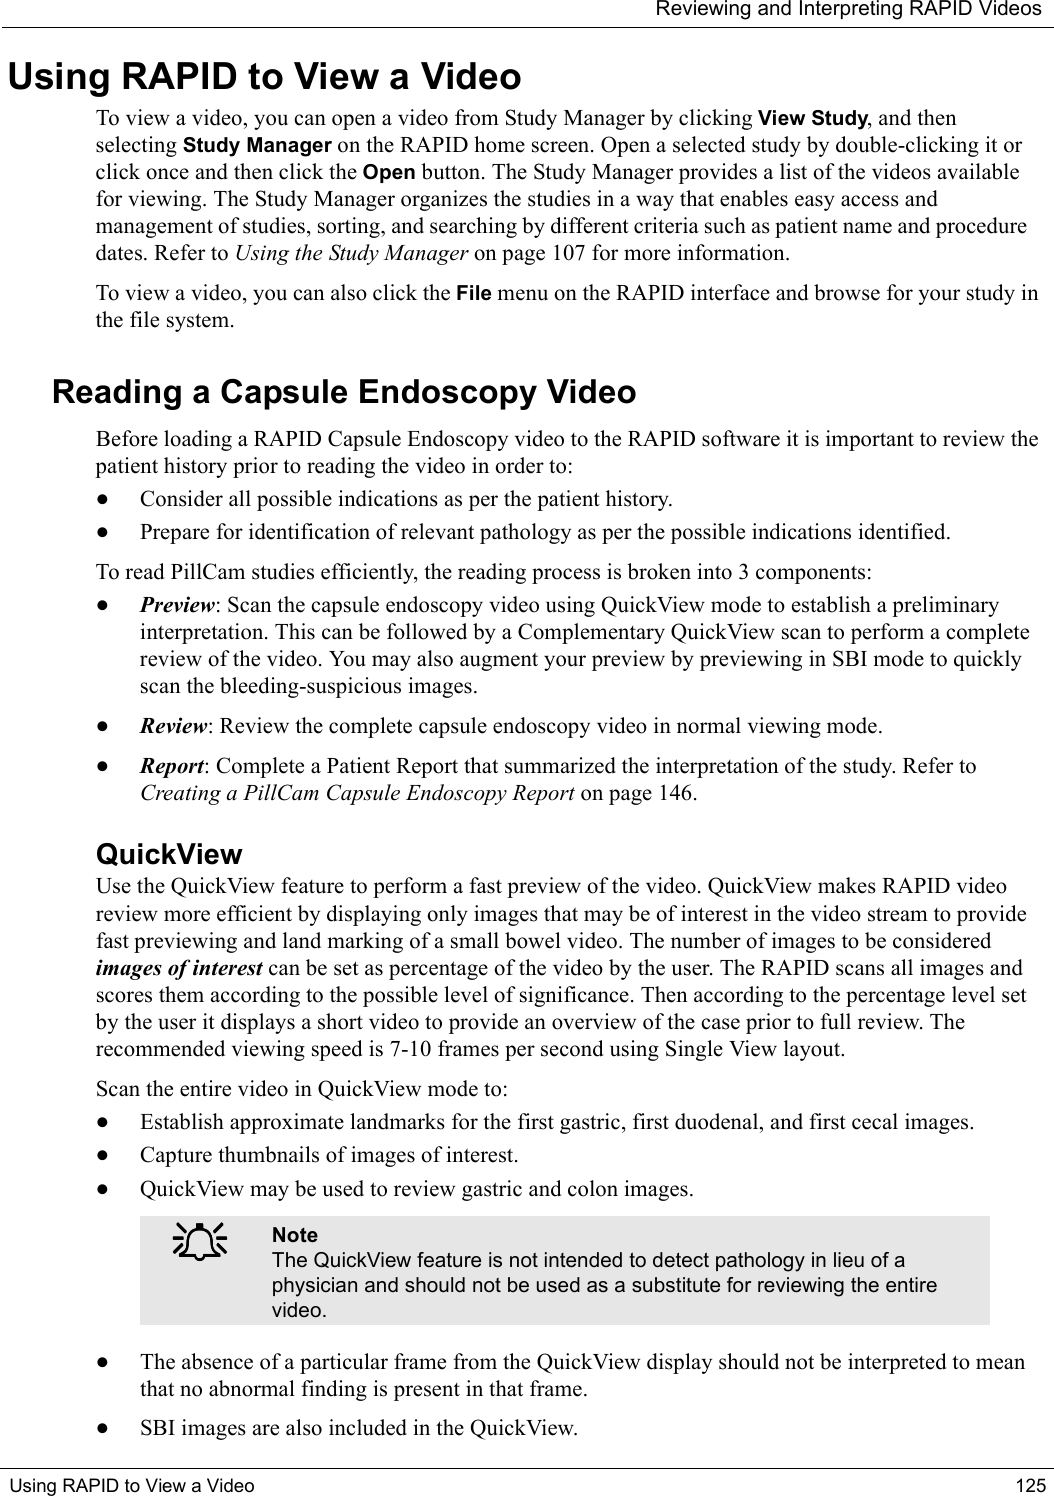 Reviewing and Interpreting RAPID VideosUsing RAPID to View a Video 125Using RAPID to View a VideoTo view a video, you can open a video from Study Manager by clicking View Study, and then selecting Study Manager on the RAPID home screen. Open a selected study by double-clicking it or click once and then click the Open button. The Study Manager provides a list of the videos available for viewing. The Study Manager organizes the studies in a way that enables easy access and management of studies, sorting, and searching by different criteria such as patient name and procedure dates. Refer to Using the Study Manager on page 107 for more information.To view a video, you can also click the File menu on the RAPID interface and browse for your study in the file system.Reading a Capsule Endoscopy Video Before loading a RAPID Capsule Endoscopy video to the RAPID software it is important to review the patient history prior to reading the video in order to:•Consider all possible indications as per the patient history.•Prepare for identification of relevant pathology as per the possible indications identified.To read PillCam studies efficiently, the reading process is broken into 3 components: •Preview: Scan the capsule endoscopy video using QuickView mode to establish a preliminary interpretation. This can be followed by a Complementary QuickView scan to perform a complete review of the video. You may also augment your preview by previewing in SBI mode to quickly scan the bleeding-suspicious images.•Review: Review the complete capsule endoscopy video in normal viewing mode. •Report: Complete a Patient Report that summarized the interpretation of the study. Refer to Creating a PillCam Capsule Endoscopy Report on page 146.QuickViewUse the QuickView feature to perform a fast preview of the video. QuickView makes RAPID video review more efficient by displaying only images that may be of interest in the video stream to provide fast previewing and land marking of a small bowel video. The number of images to be considered images of interest can be set as percentage of the video by the user. The RAPID scans all images and scores them according to the possible level of significance. Then according to the percentage level set by the user it displays a short video to provide an overview of the case prior to full review. The recommended viewing speed is 7-10 frames per second using Single View layout.Scan the entire video in QuickView mode to: •Establish approximate landmarks for the first gastric, first duodenal, and first cecal images. •Capture thumbnails of images of interest. •QuickView may be used to review gastric and colon images. •The absence of a particular frame from the QuickView display should not be interpreted to mean that no abnormal finding is present in that frame.•SBI images are also included in the QuickView.֠֠֠֠NoteThe QuickView feature is not intended to detect pathology in lieu of a physician and should not be used as a substitute for reviewing the entire video.